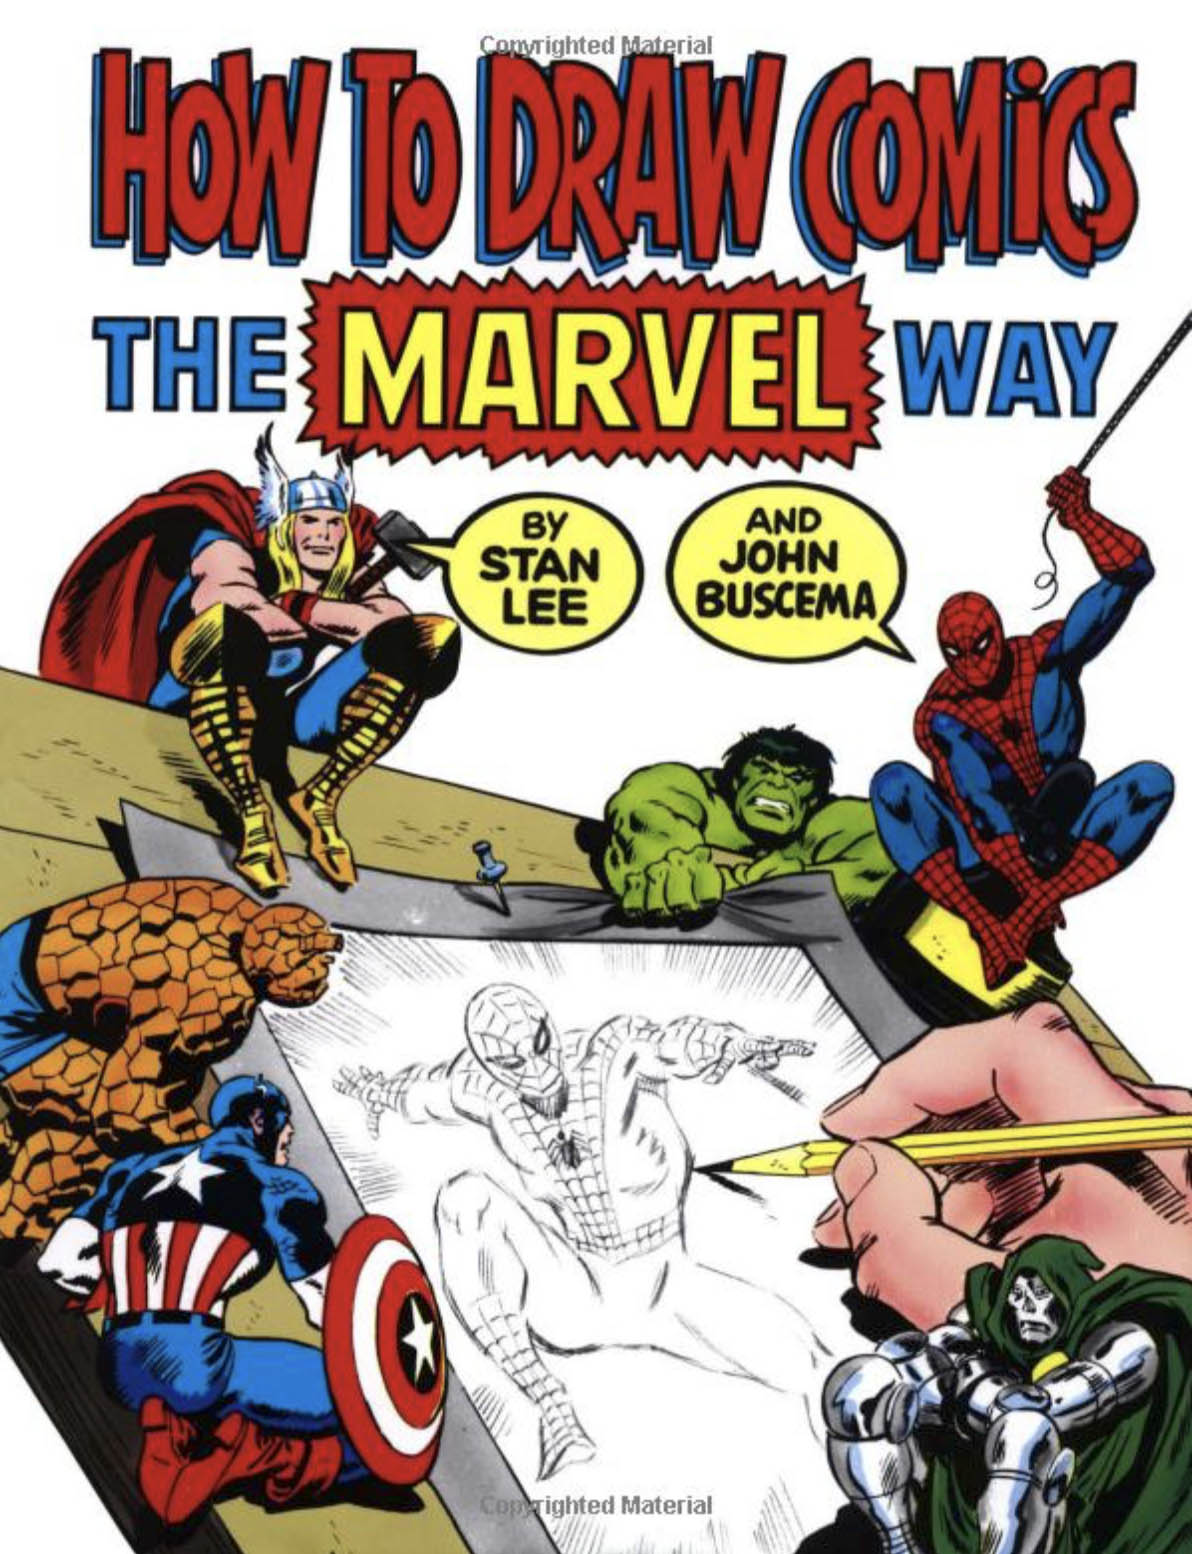 Learn how to draw comics the Marvel Way! Great Finds